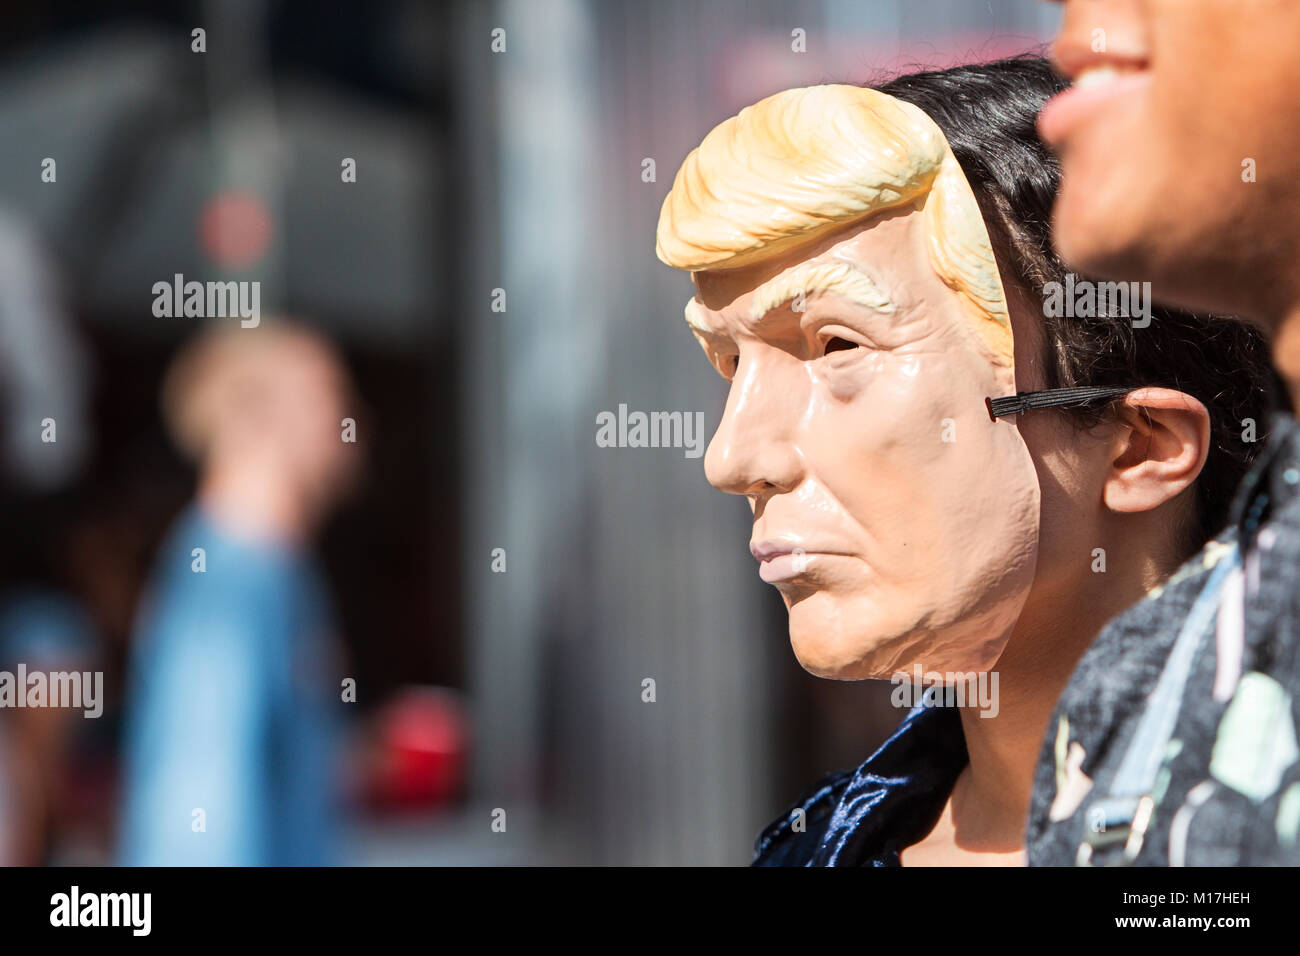 Atlanta, GA, USA - October 21, 2017:  A person wears a Donald Trump mask at the Little Five Points Halloween Parade on October 21, 2017 in Atlanta. Stock Photo